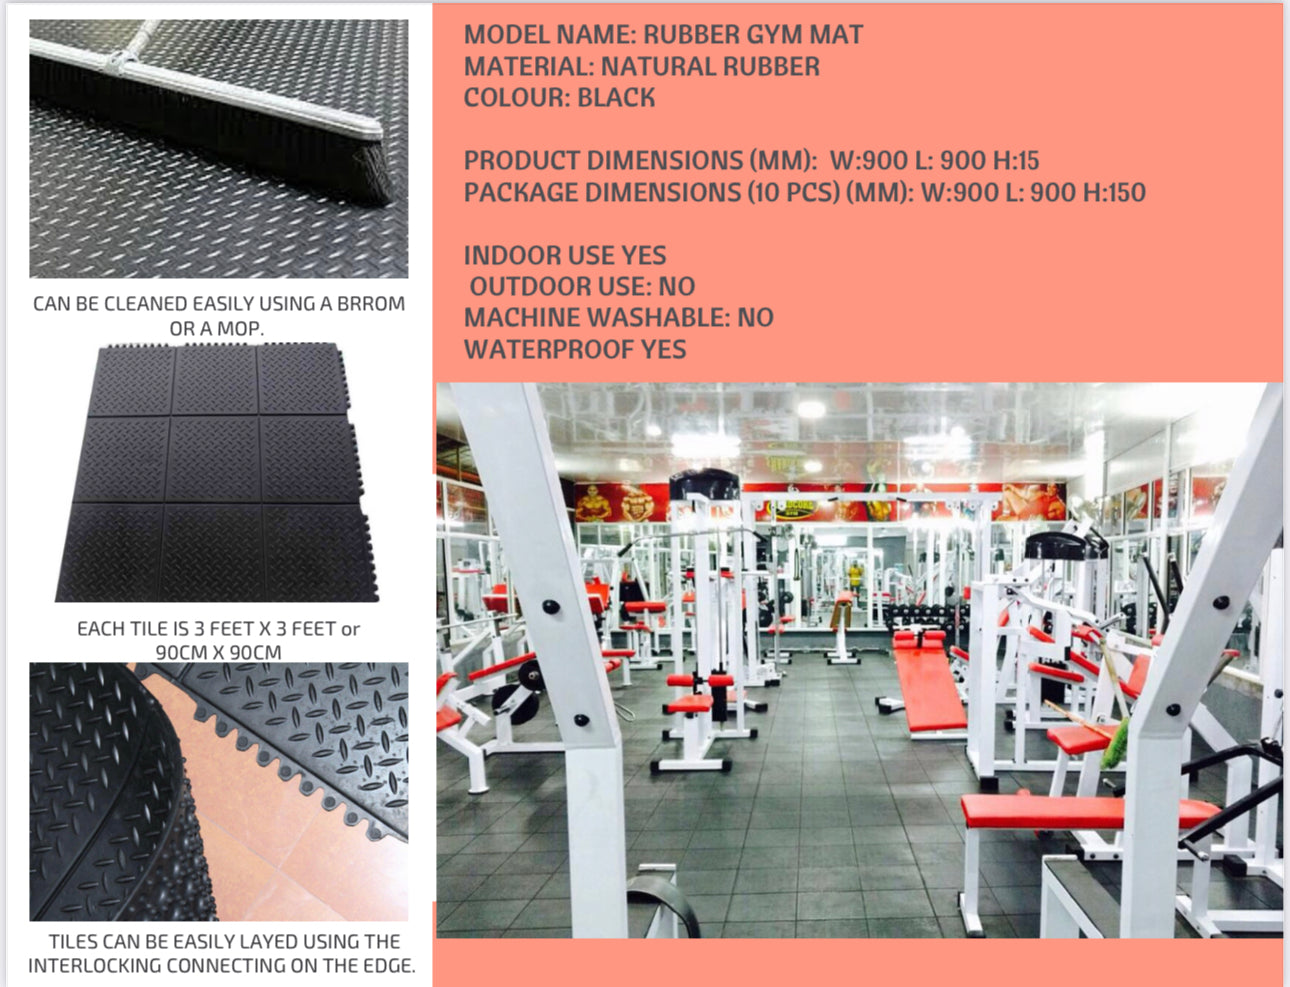 Gym Comfort Anti-Fatigue Exercise Mat - Skid-Resistant Rubber Floor for Gyms & Garages